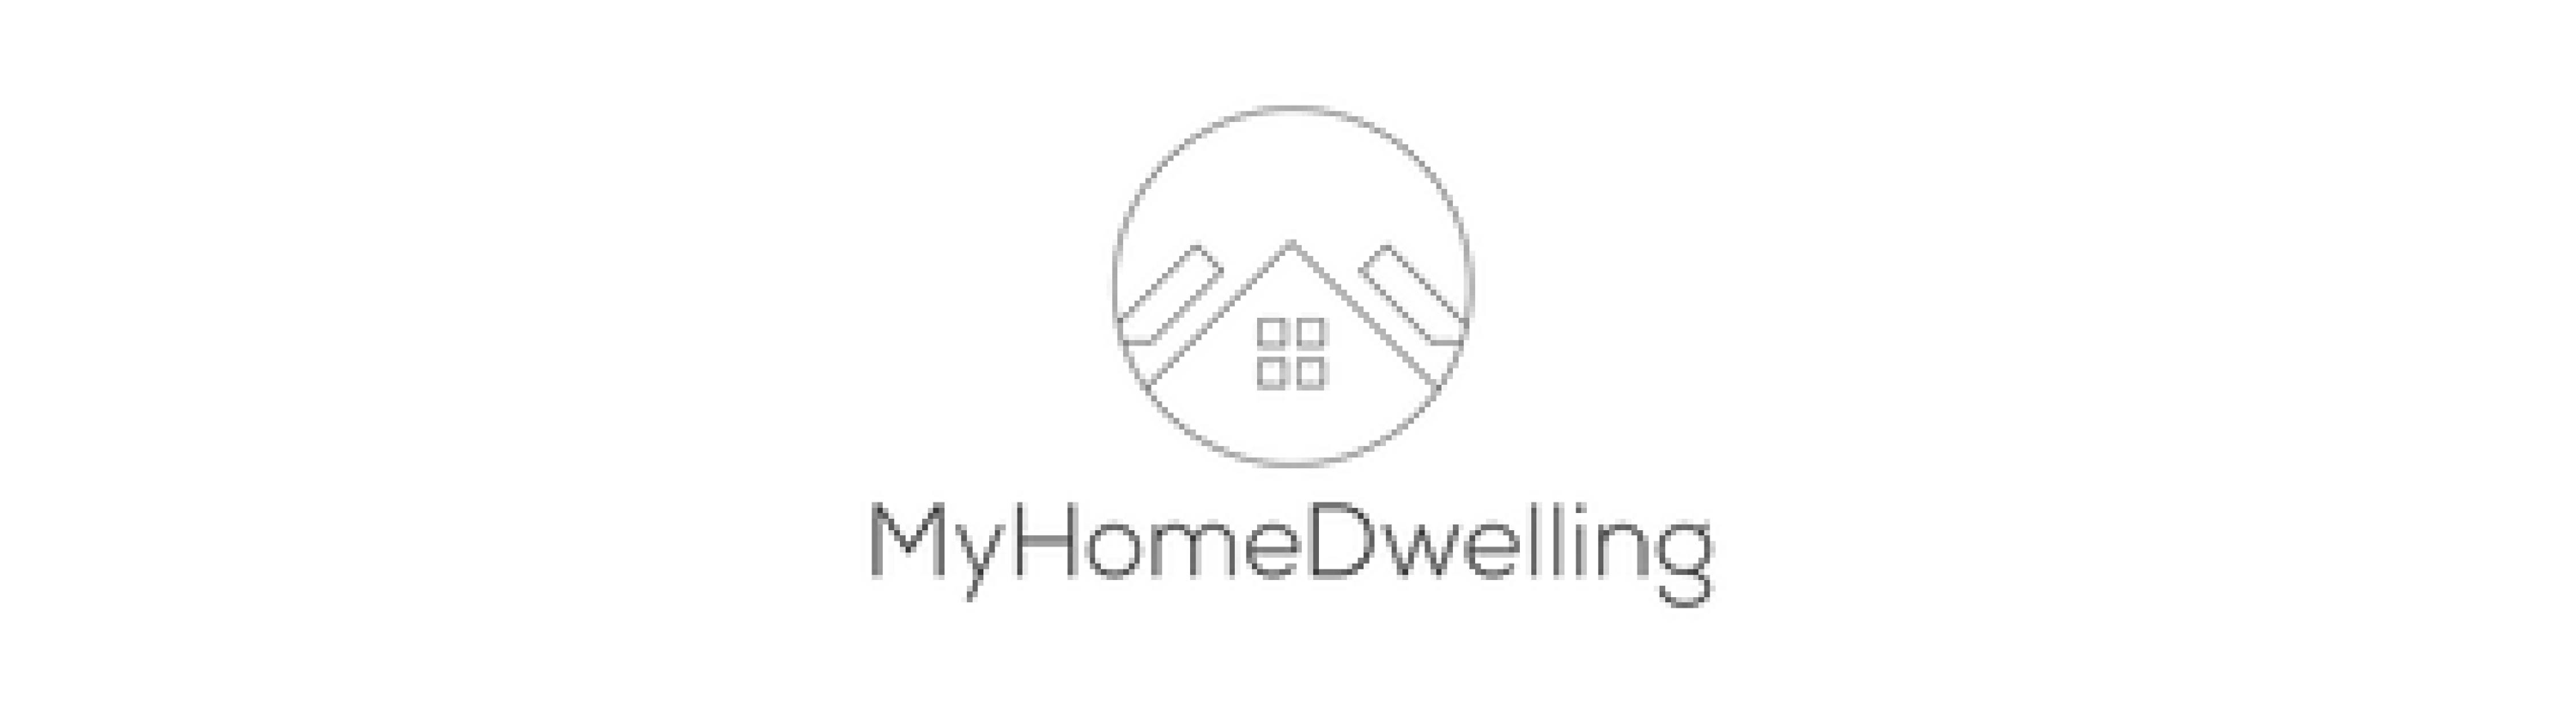 myhomedwelling article